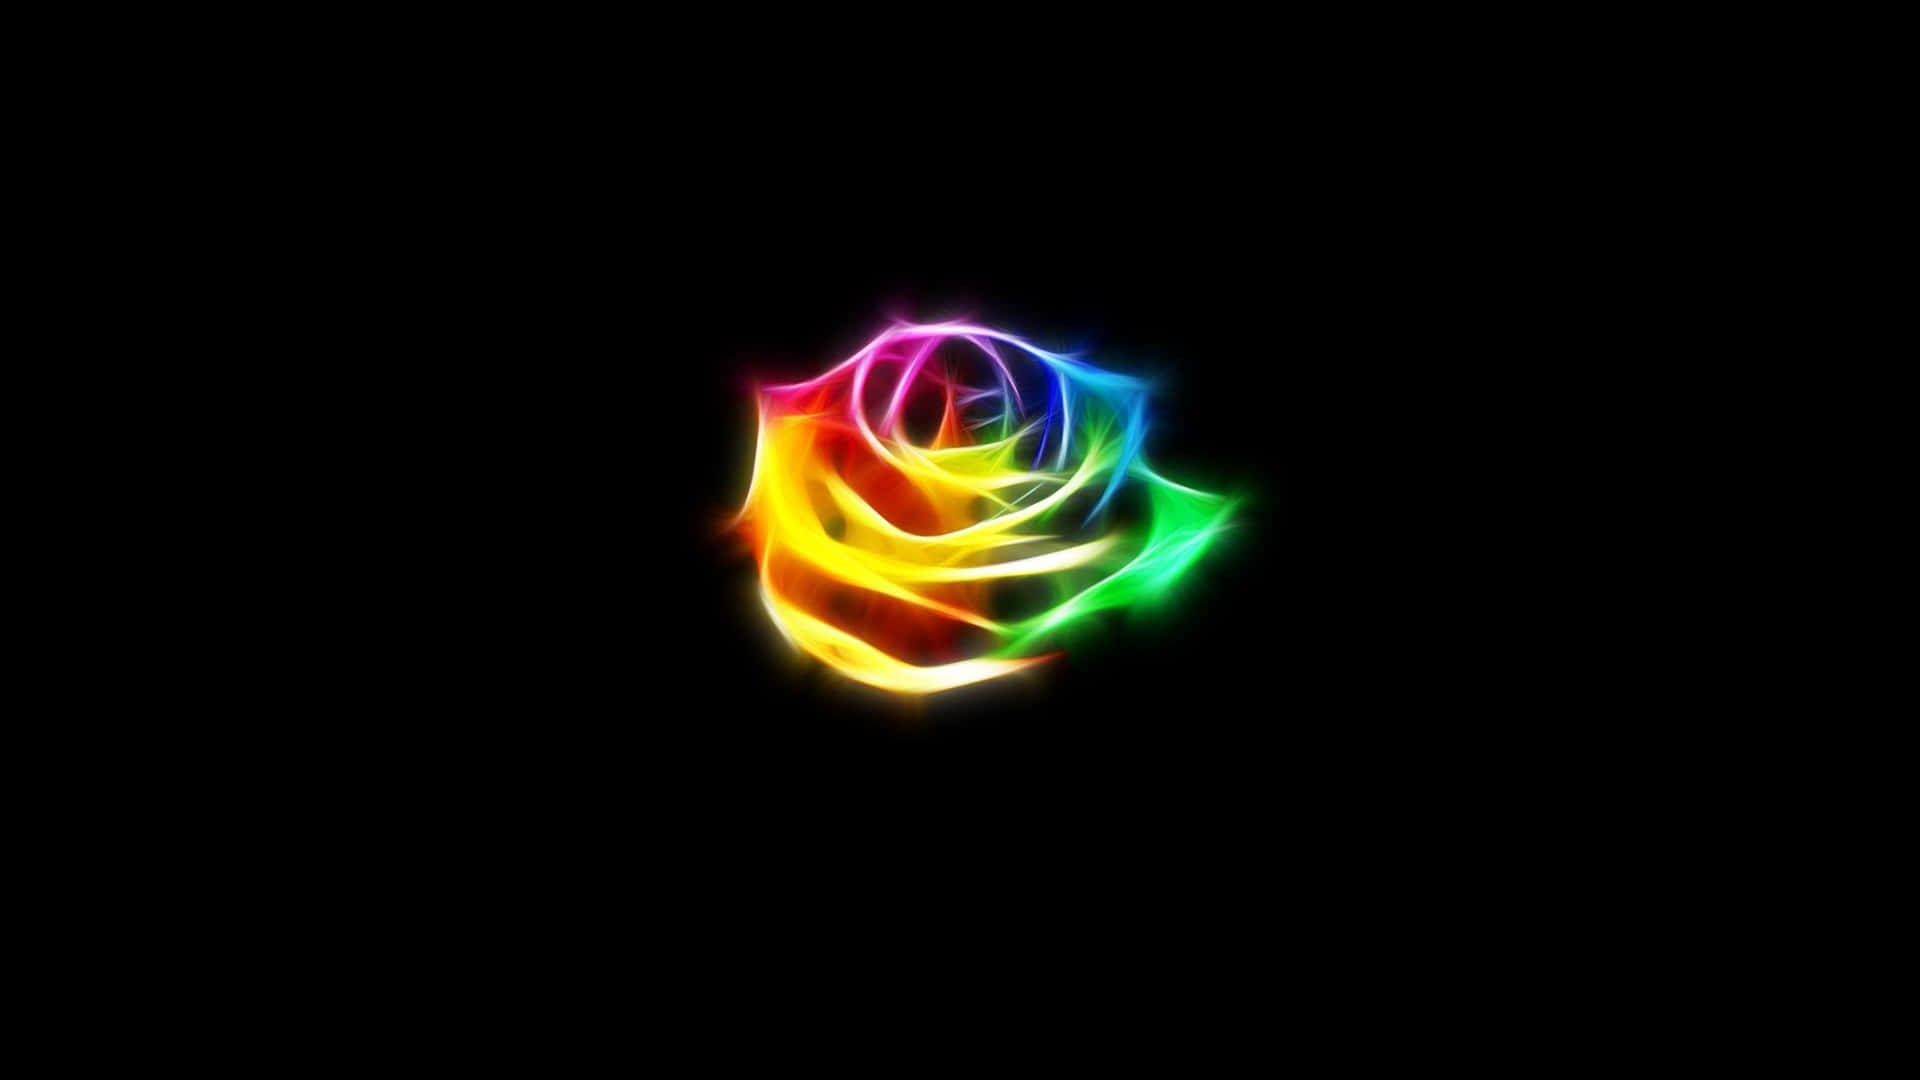 A Rainbow Rose On A Black Background